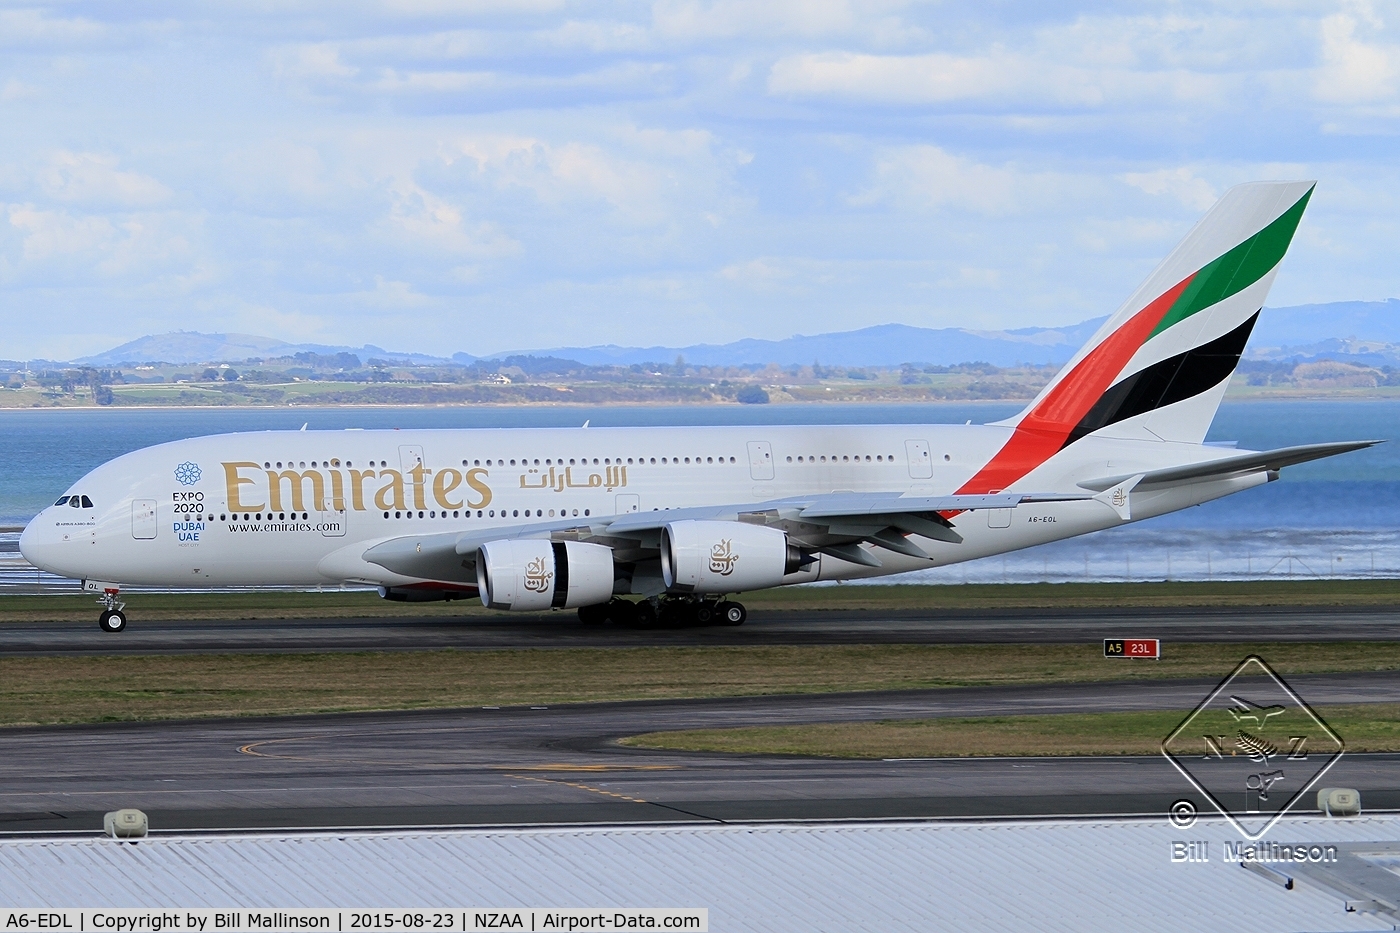 A6-EDL, 2010 Airbus A380-861 C/N 046, in from SYD